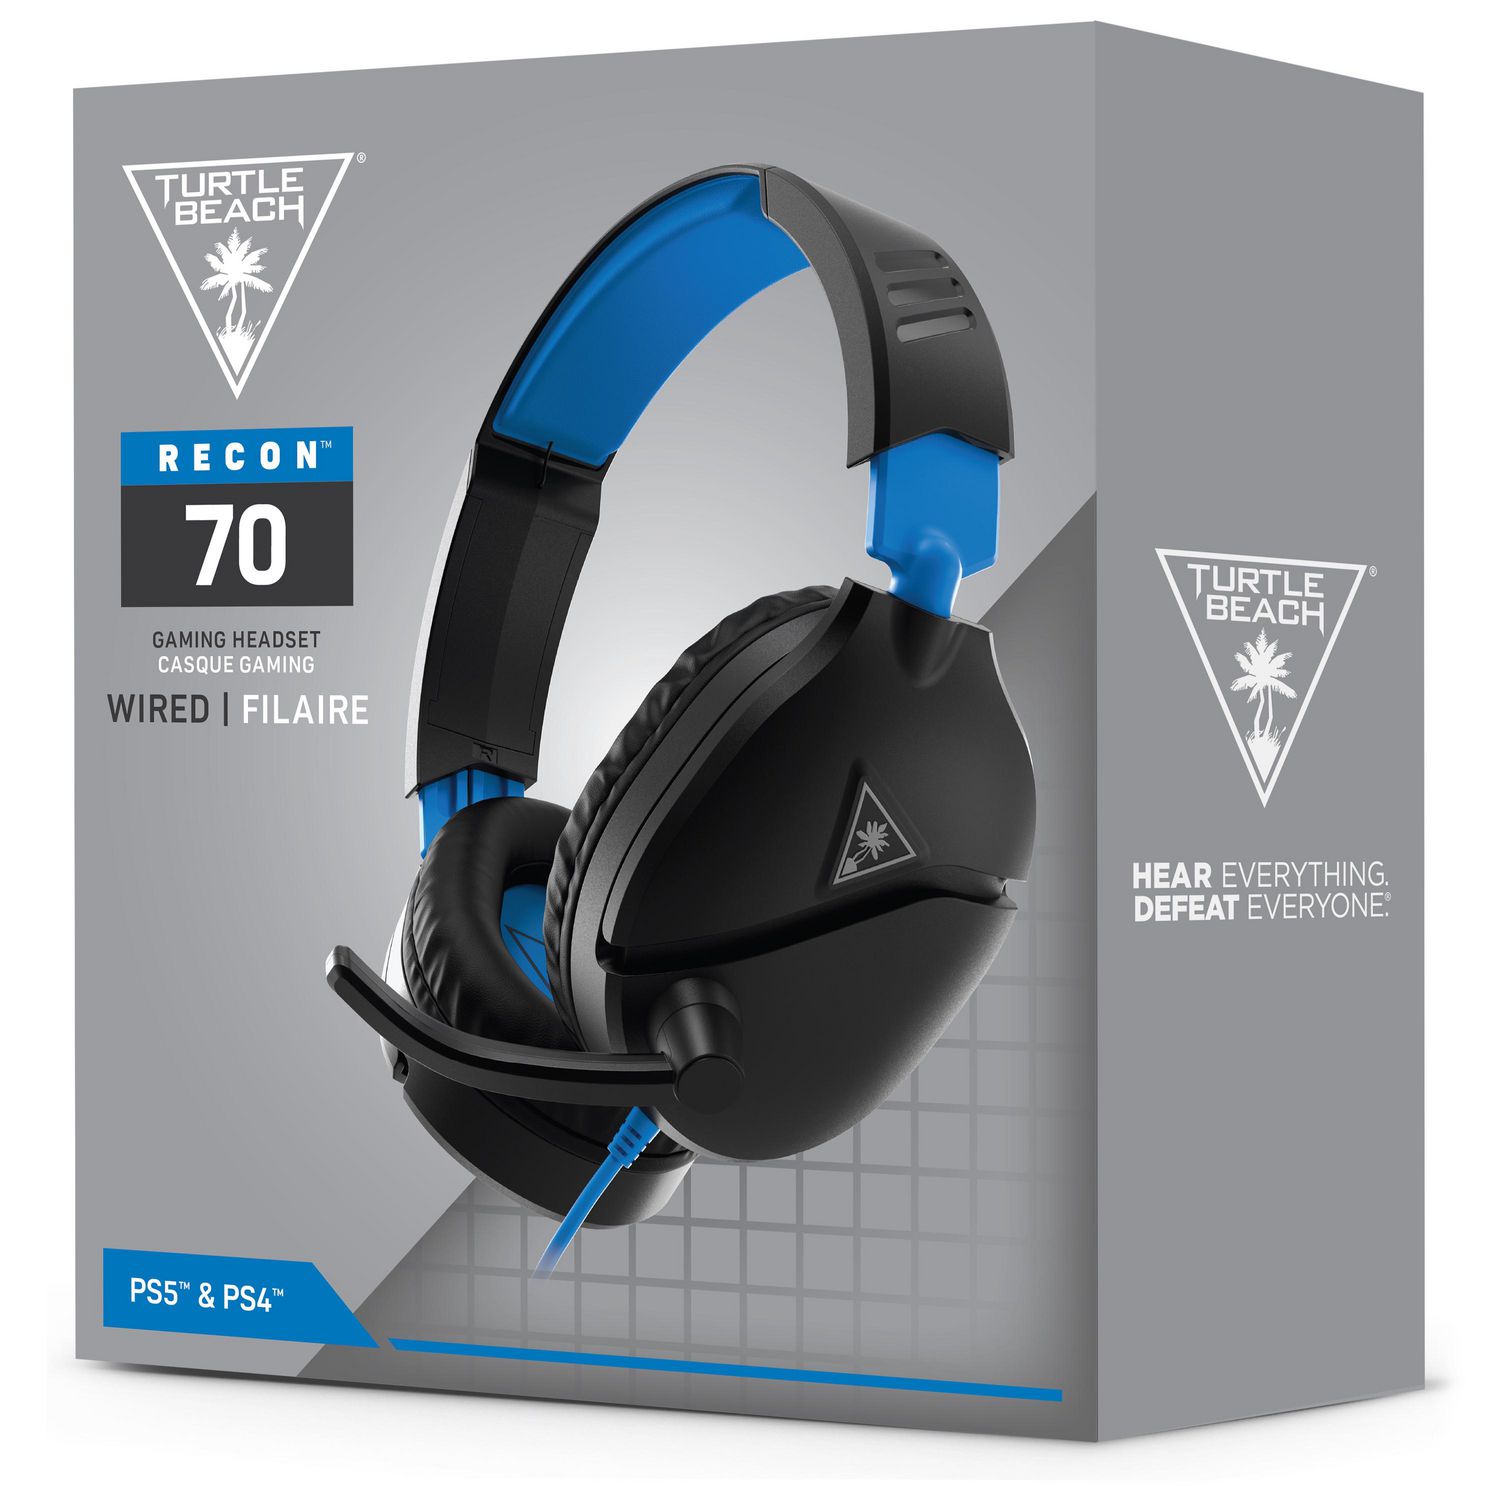 Propio Mm dos semanas Turtle Beach® Recon 70 Gaming Headset for PS4™ Pro, PS4™, and PS5™ |  Walmart Canada